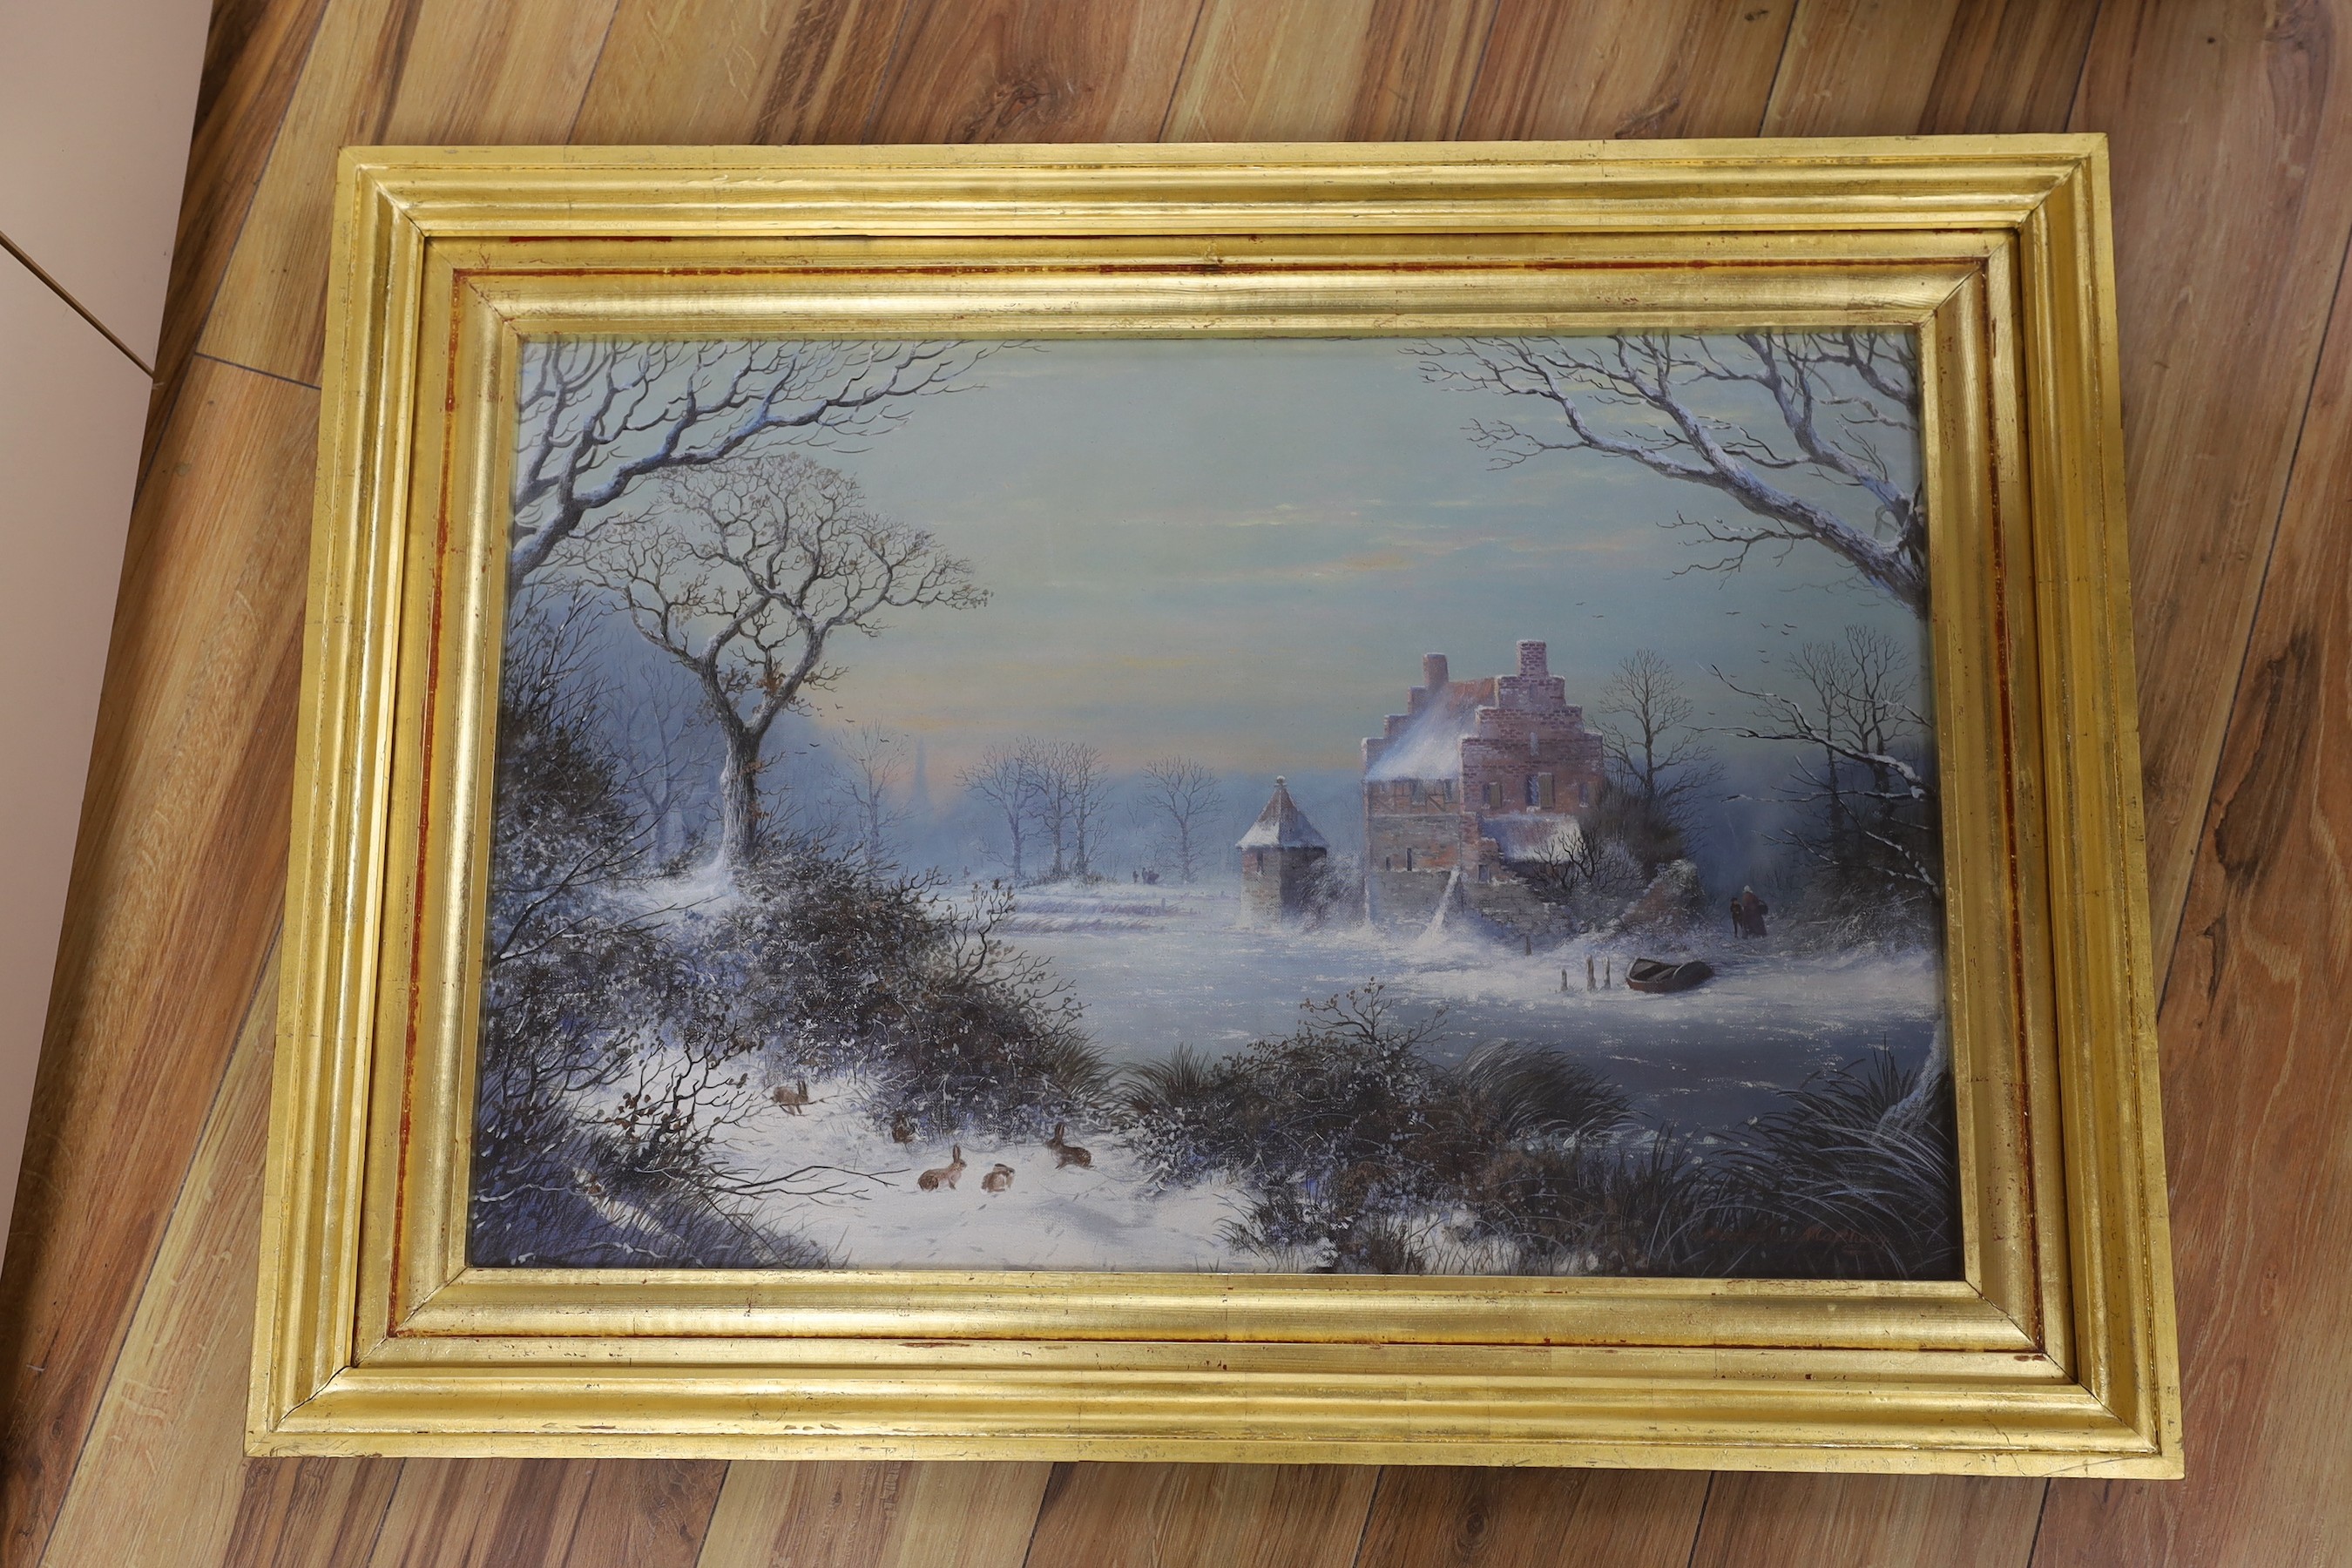 Michael Matthews (1933-), oil on canvas, 'The Old Manor', signed, 49 x 75cm